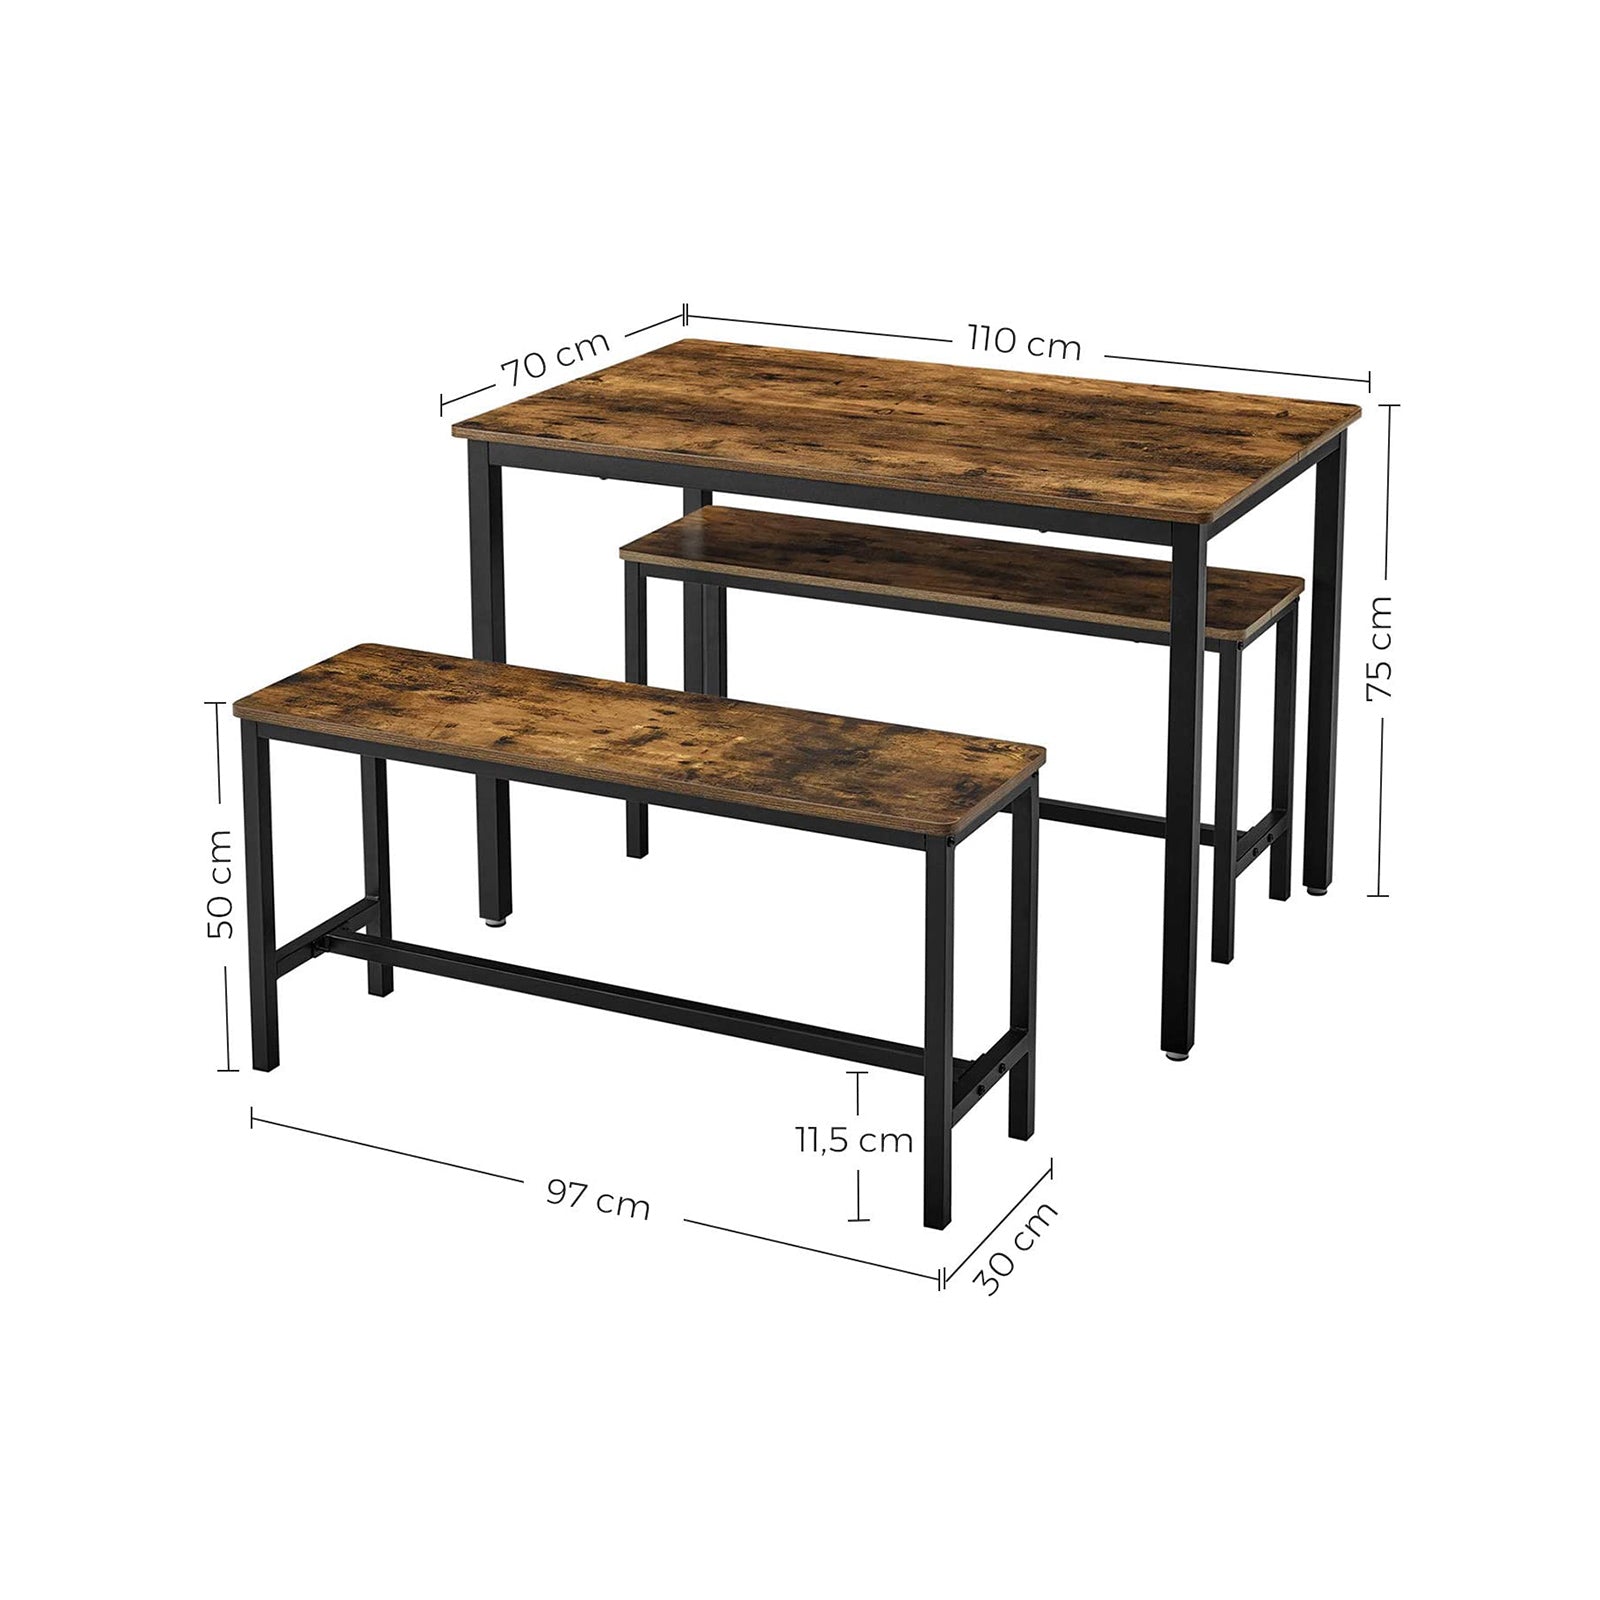 Dining Table with 2 Benches, 3 Pieces Set, Kitchen Table of 110 x 70 x 75 cm, 2 Benches of 97 x 30 x 50 cm Each, VASAGLE, 5